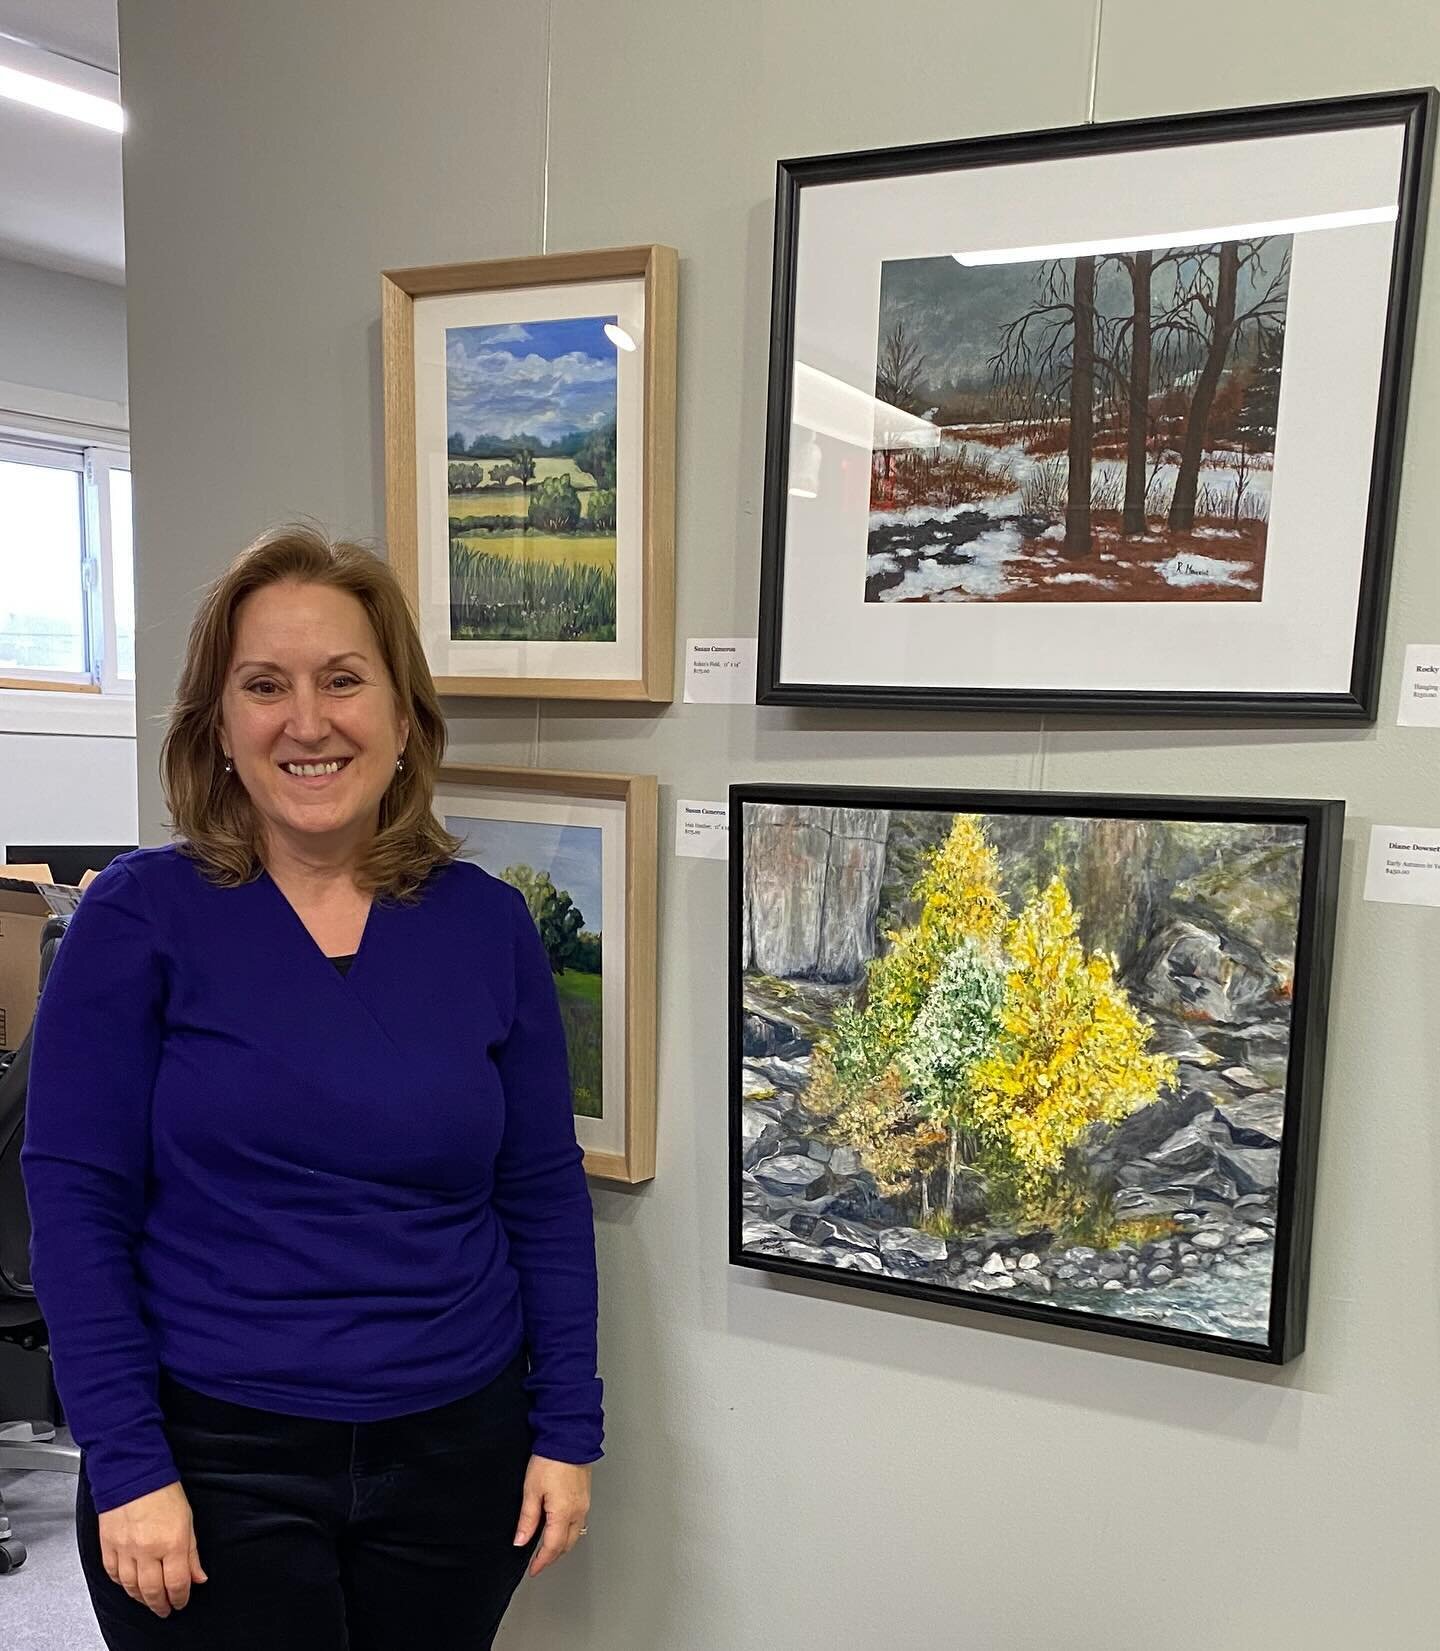 🎨🌞🎨 Hello from @oas_oakvilleartsociety Student Show &amp; Sale!
It&rsquo;s on this weekend only in Oakville, so if you&rsquo;re in the area (560 Bronte Road) be sure to check out the terrific art from 1-4pm on Sunday.
As I was a student in one of 